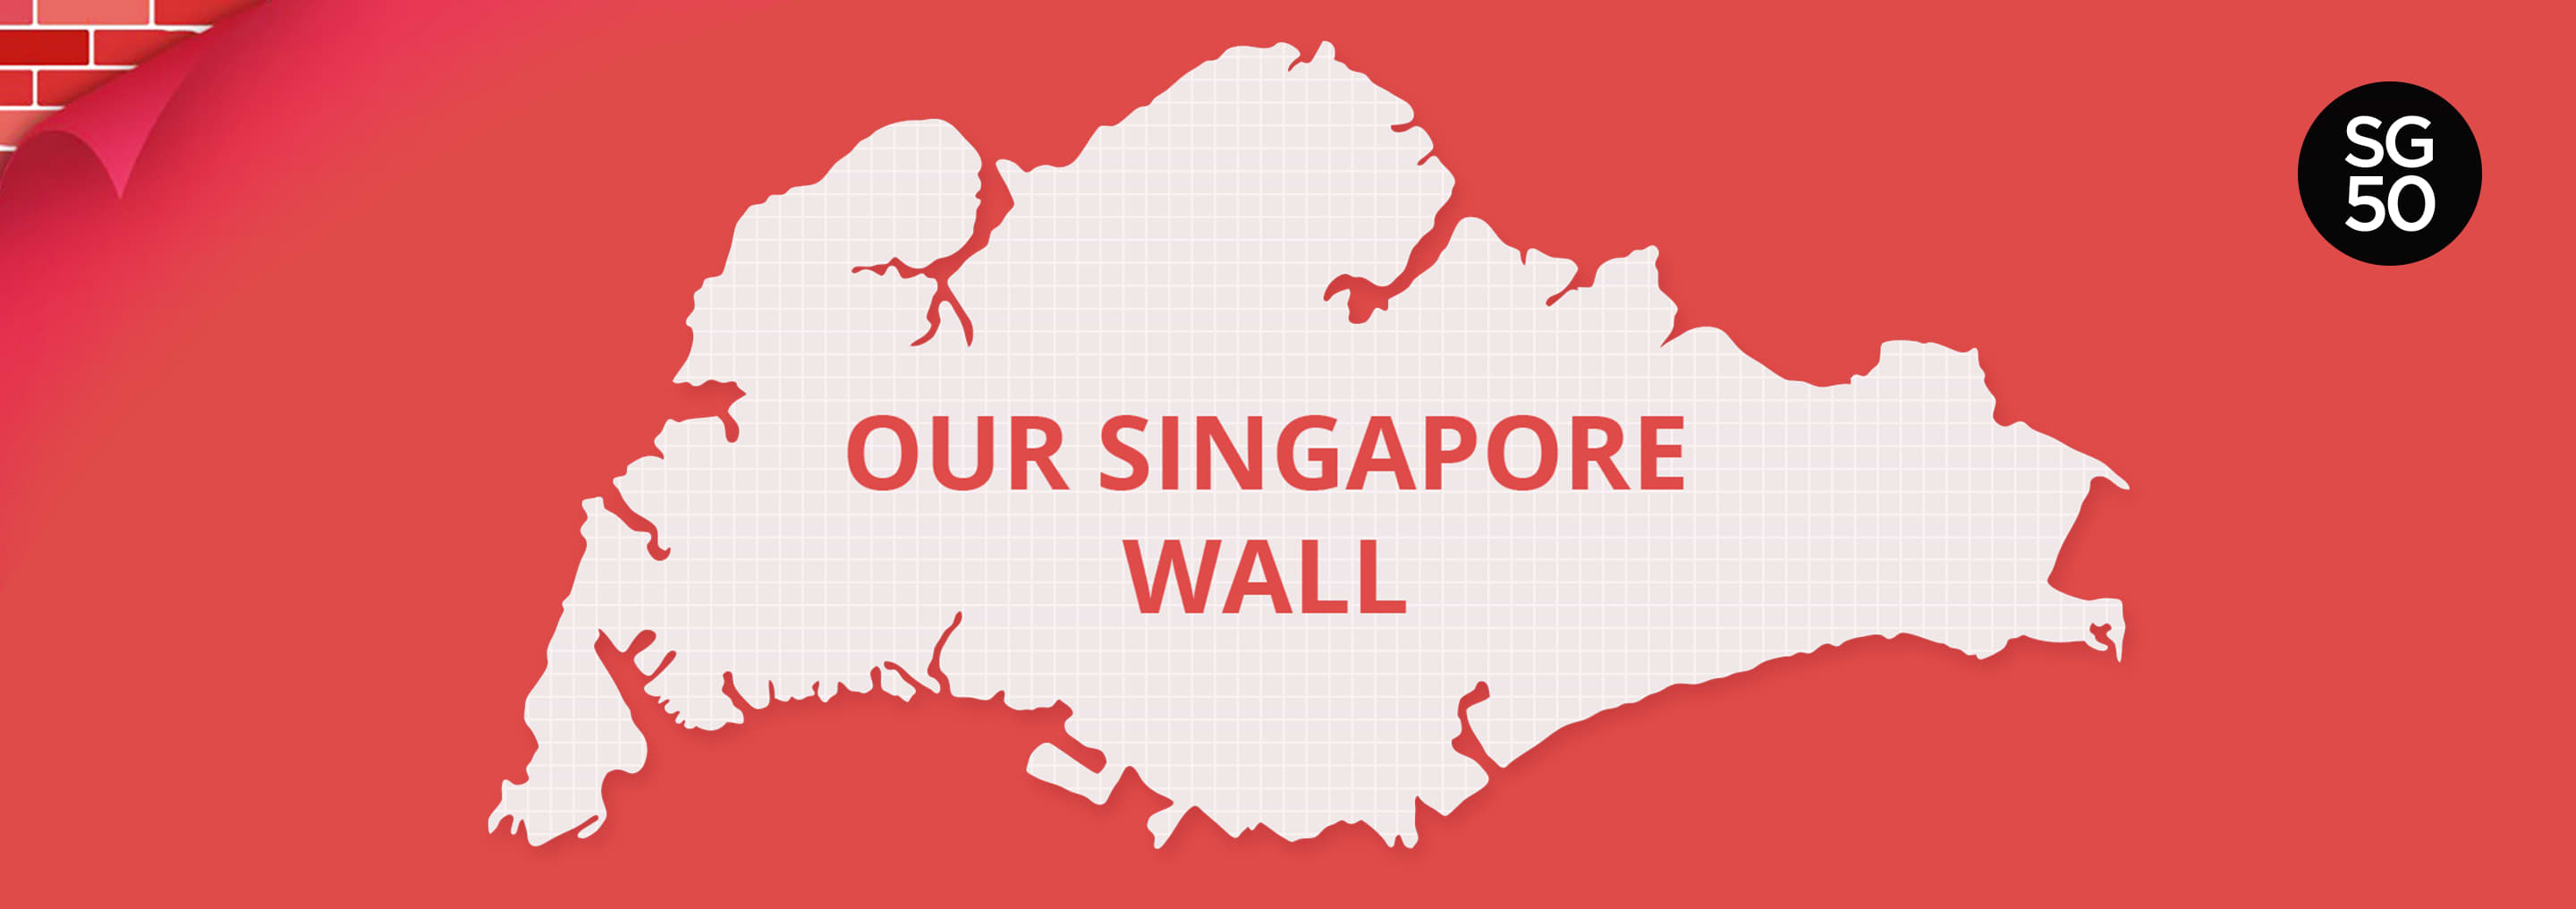 SG50 Our Singapore Wall